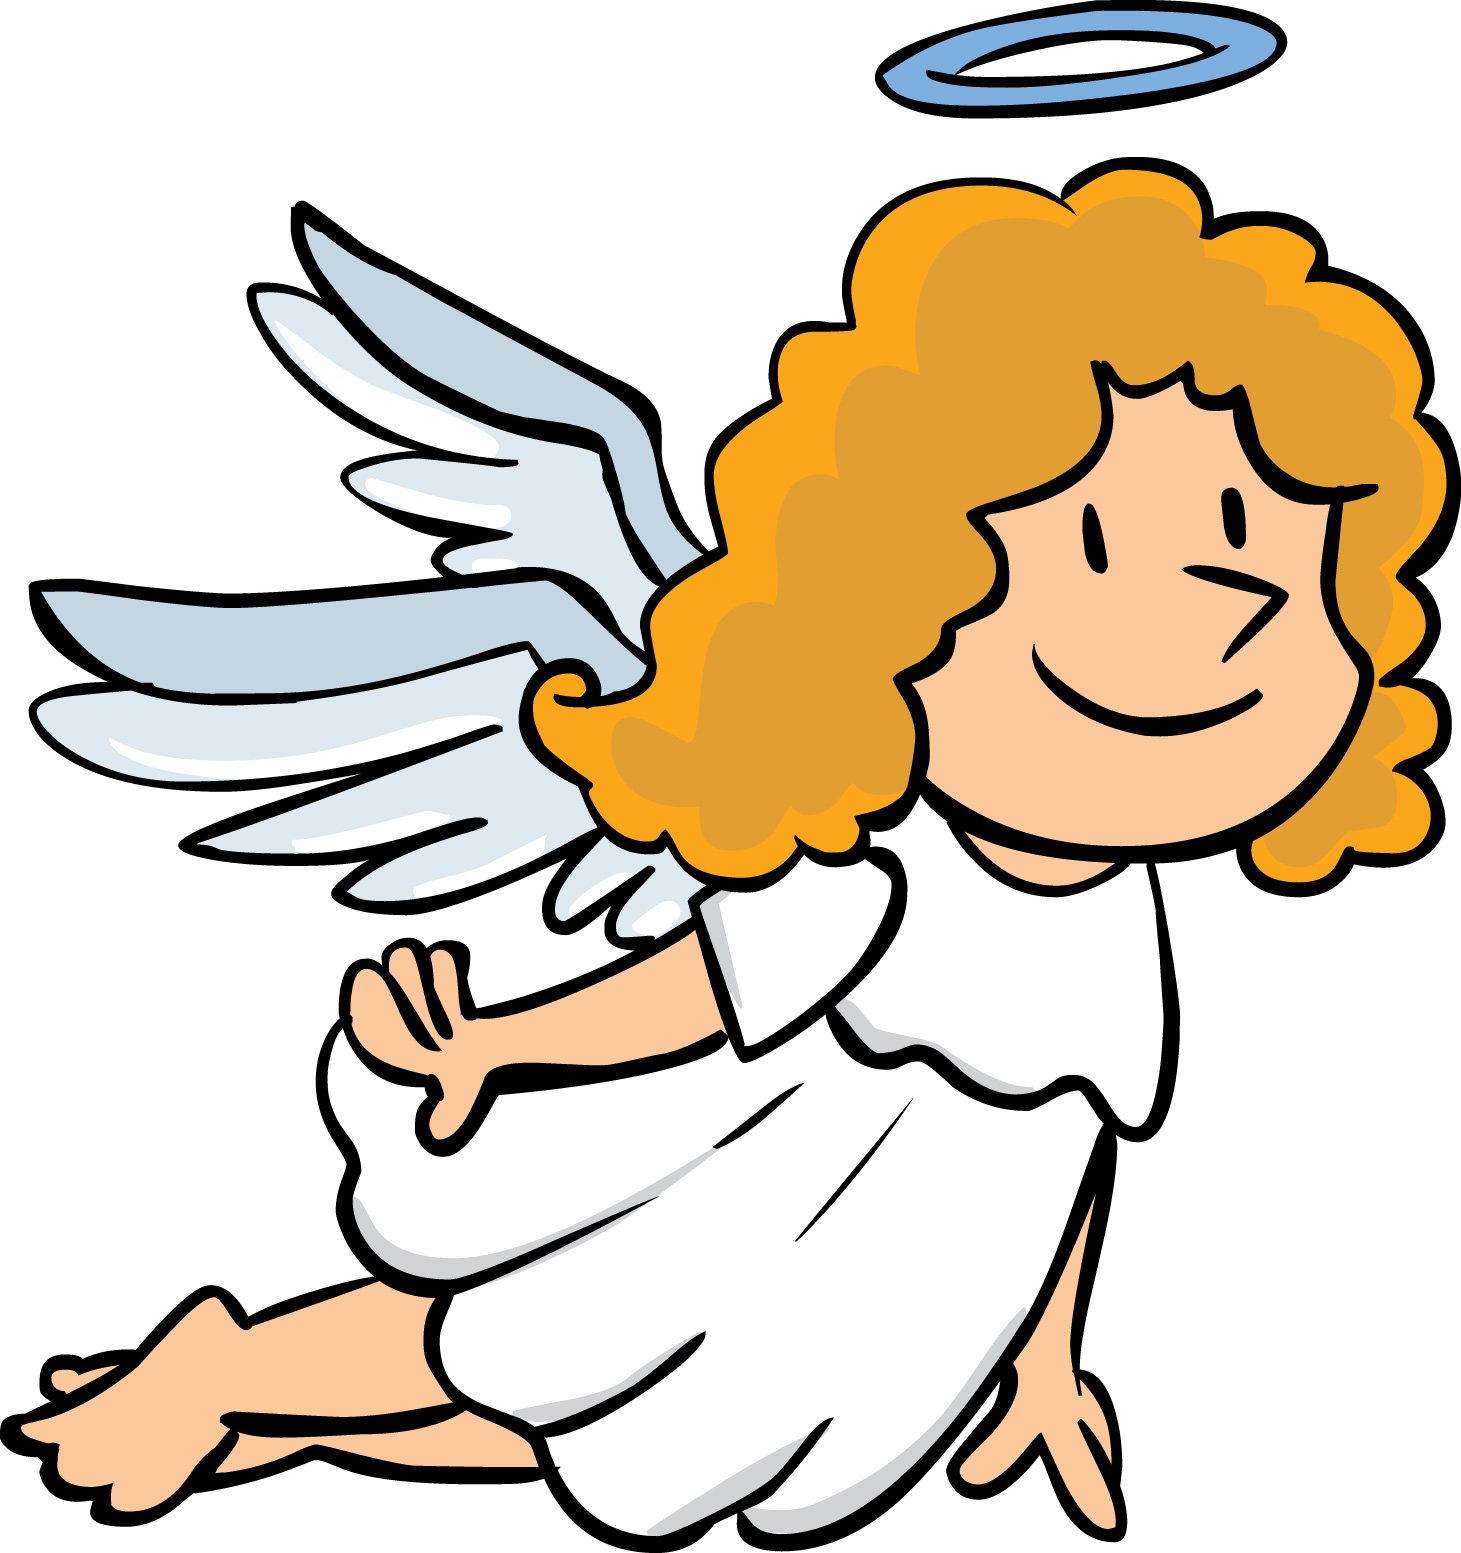 free clipart angels download - photo #23